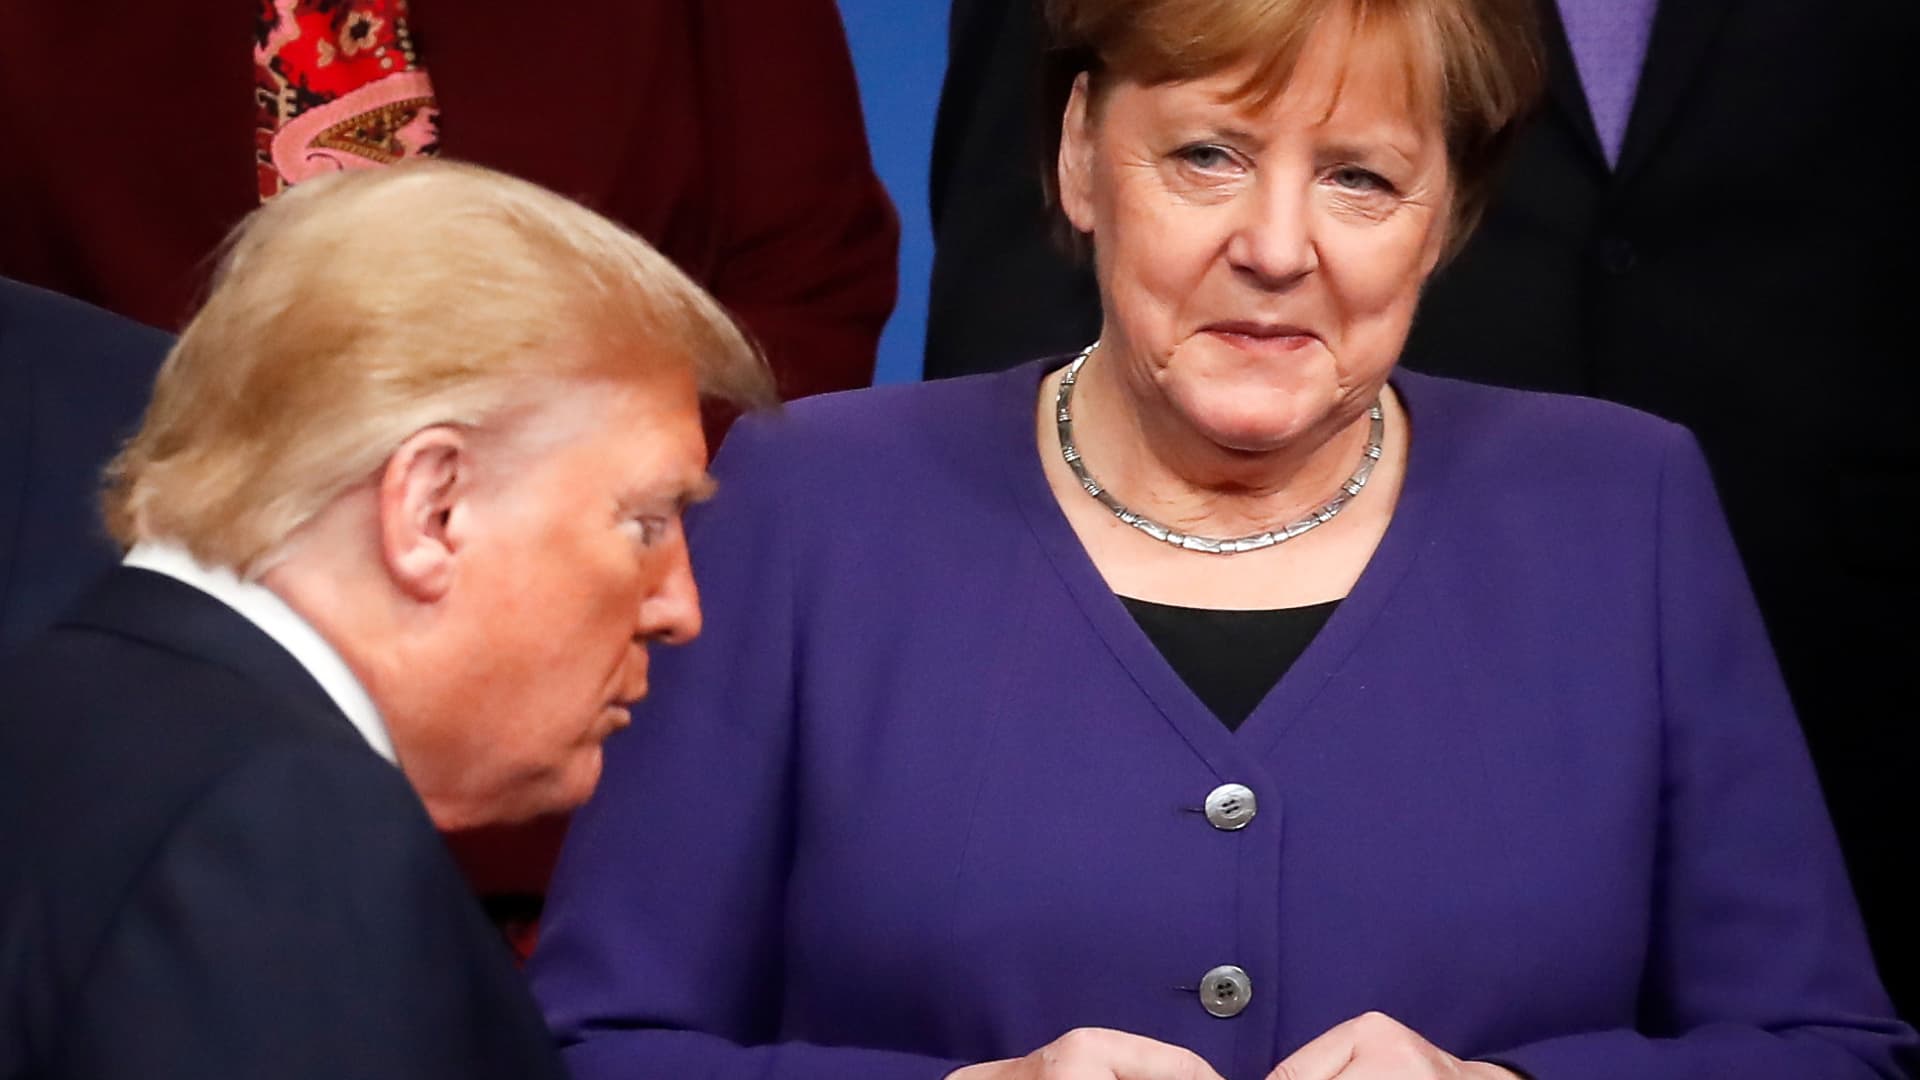 Germany's Chancellor Angela Merkel (R) looks at US President Donald Trump (R) walking past her during a family photo as part of the NATO summit at the Grove hotel in Watford, northeast of London on December 4, 2019.